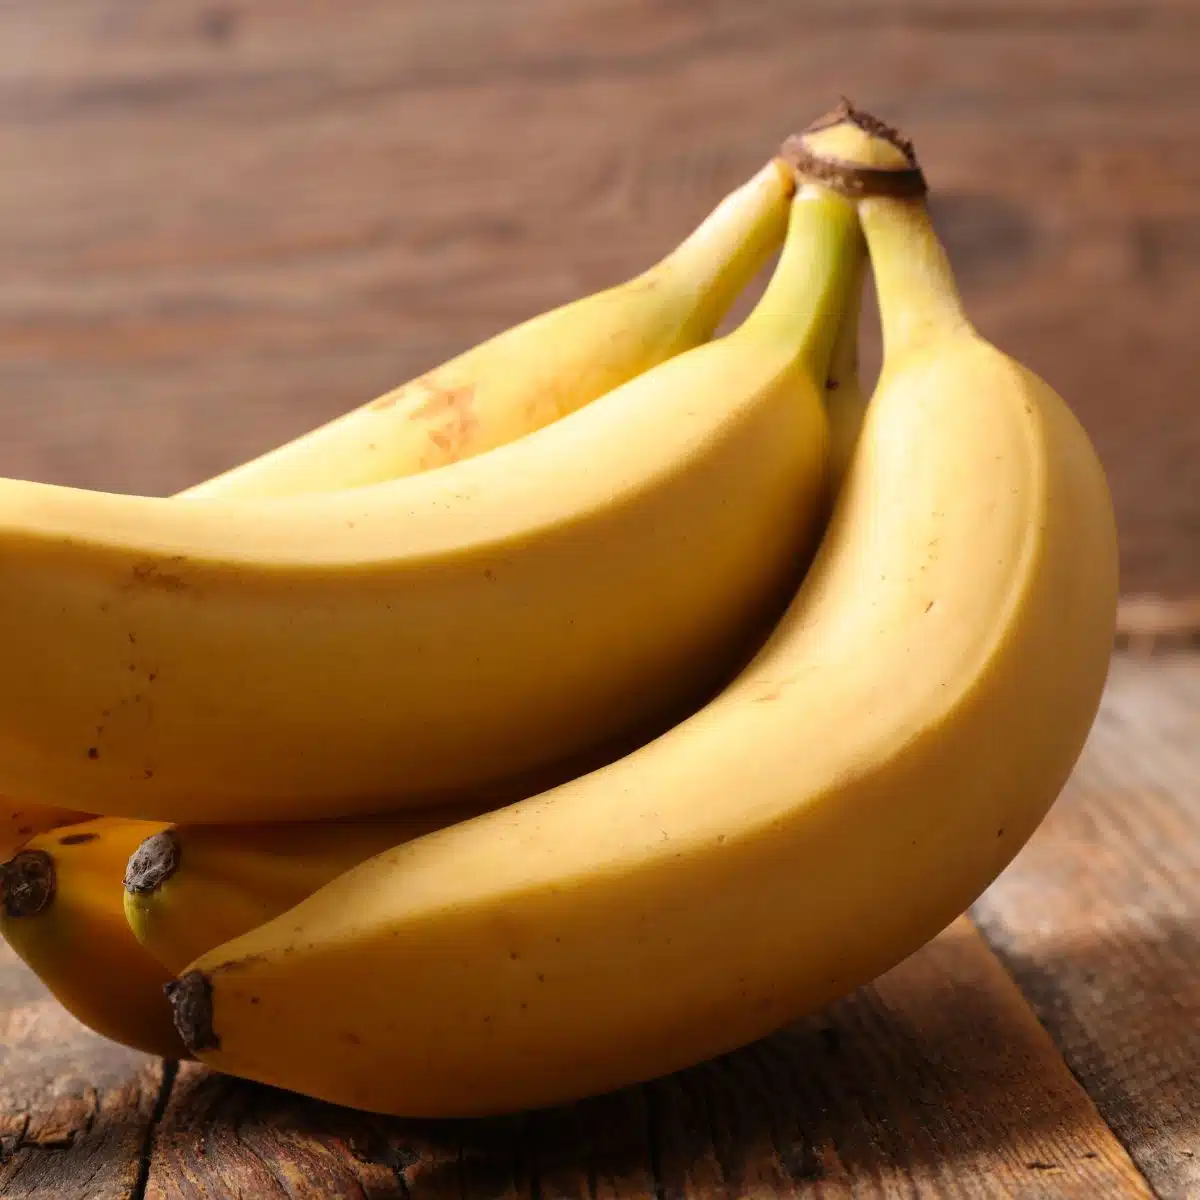 Best banana substitute ideas and alternatives to use when you don't have fresh bunch of bananas like these.